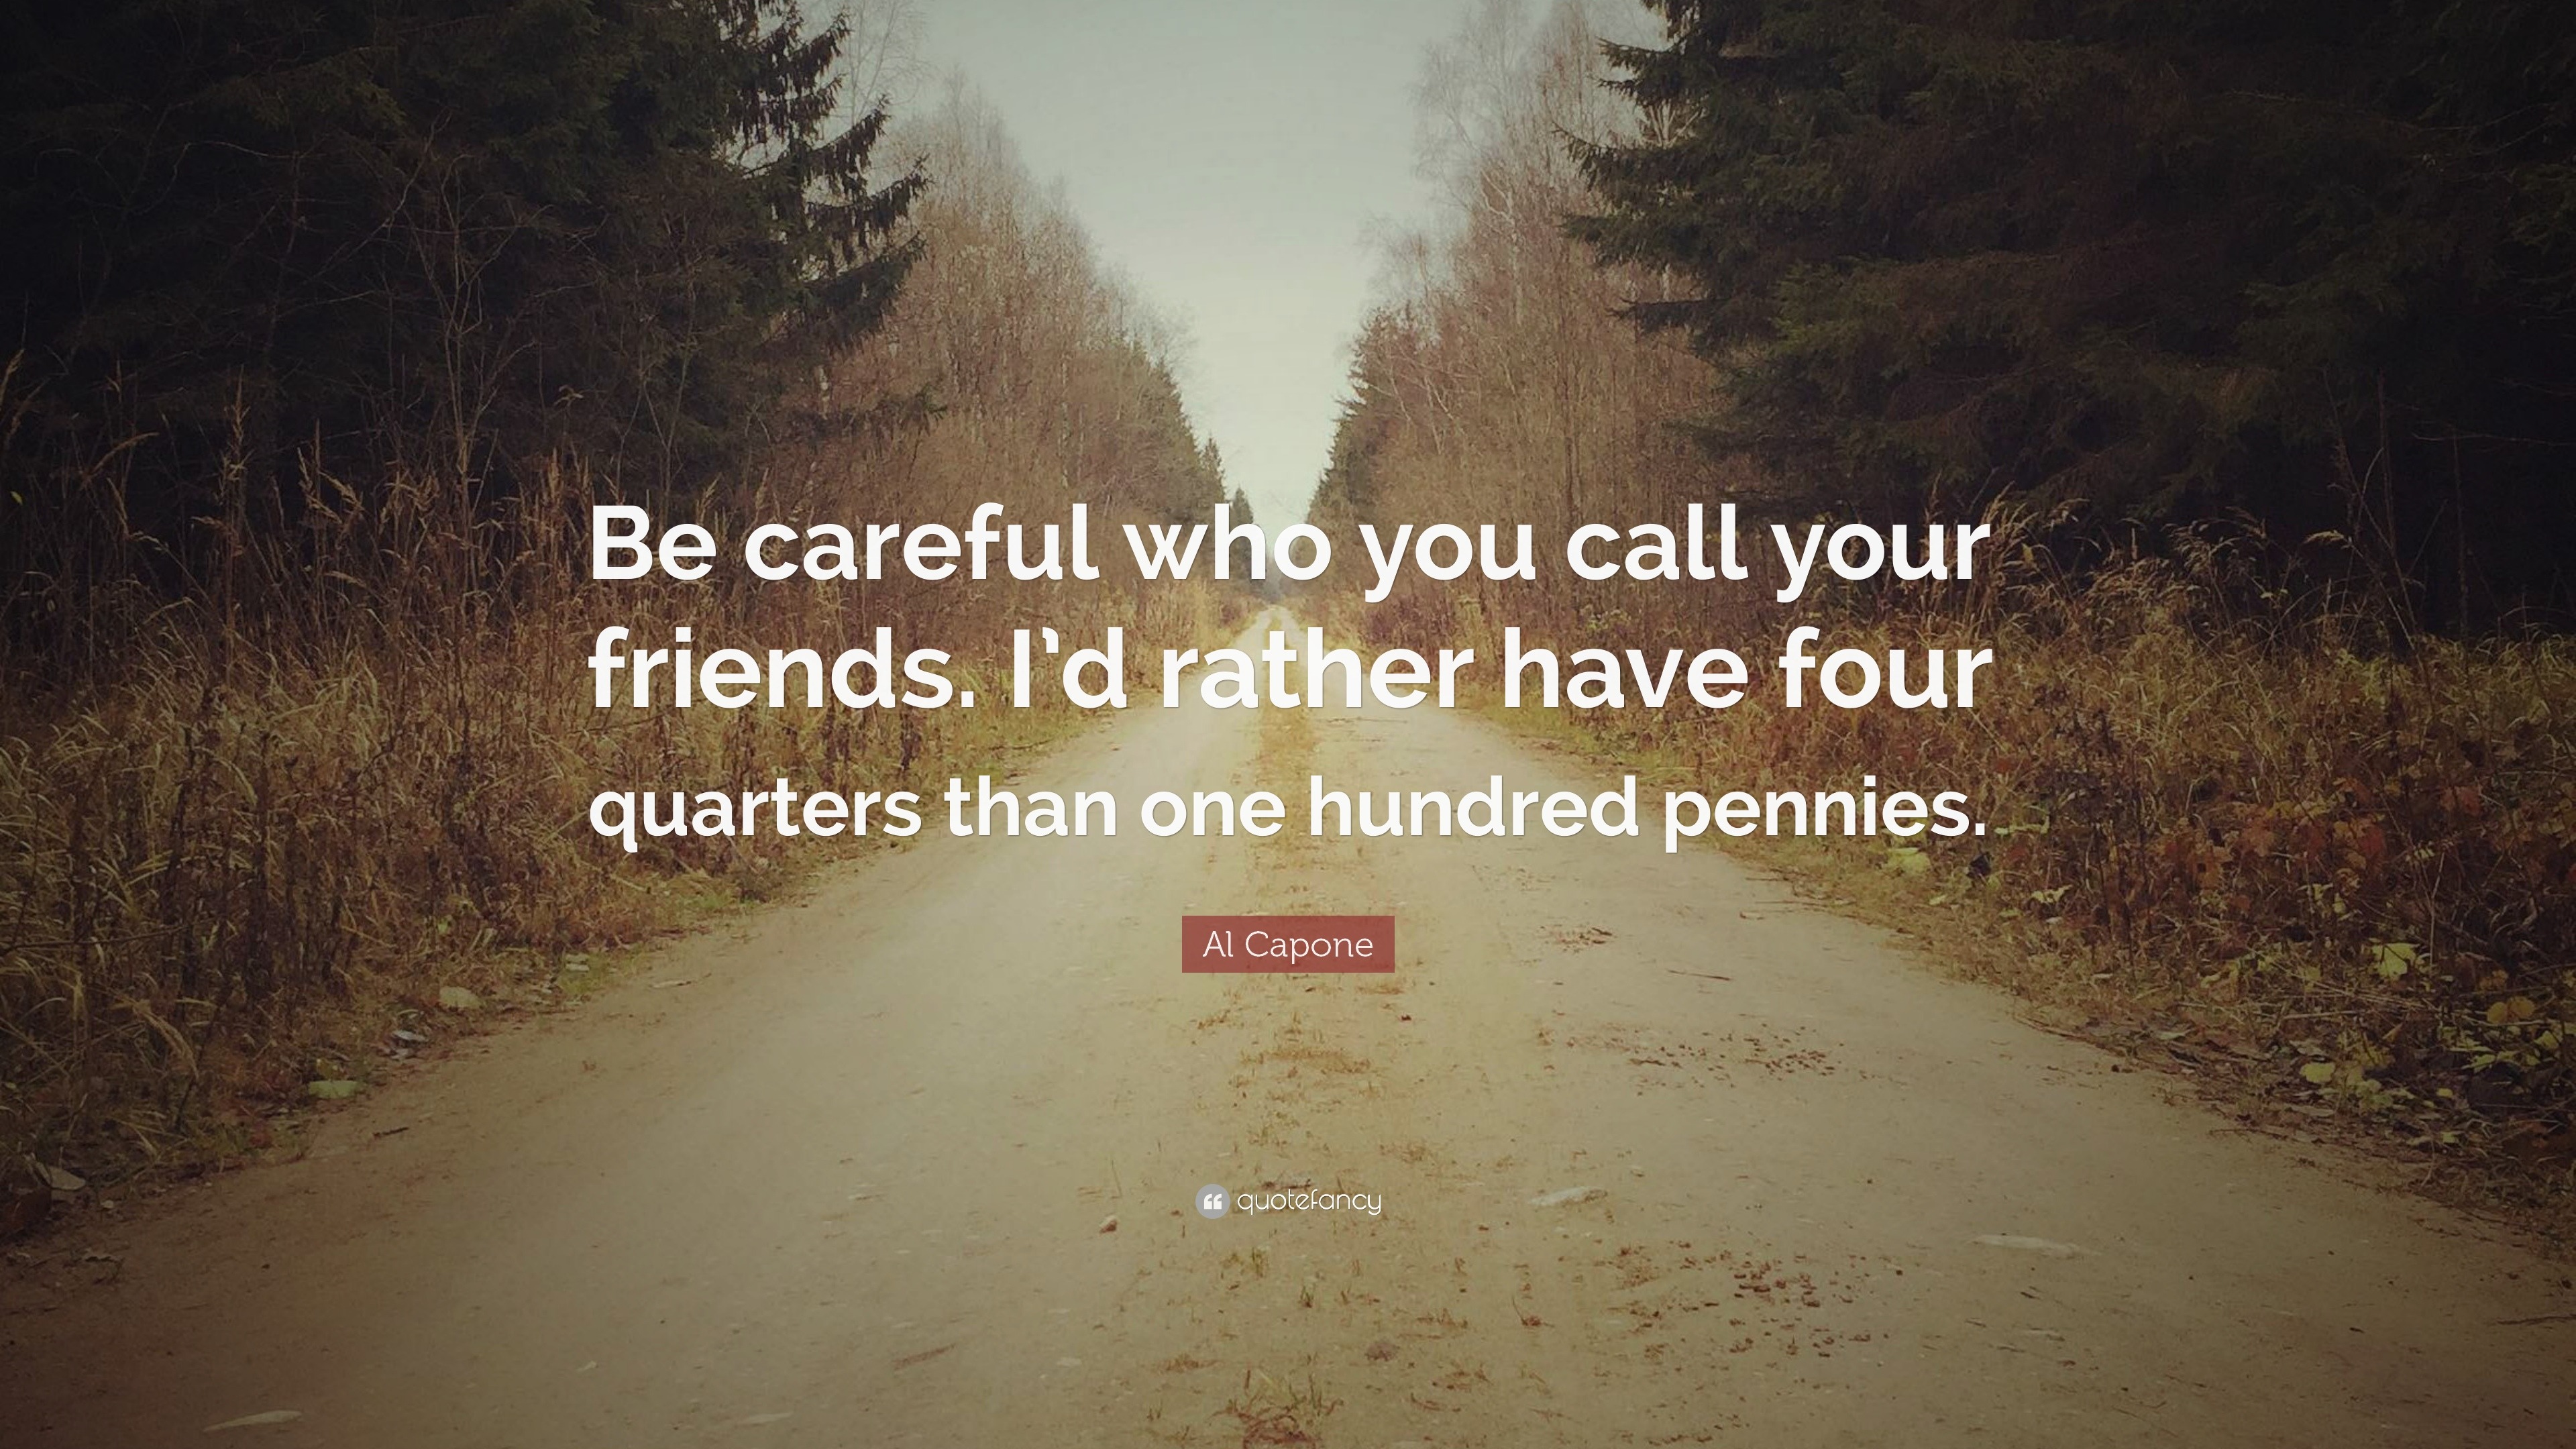 al-capone-quote-be-careful-who-you-call-your-friends-i-d-rather-have